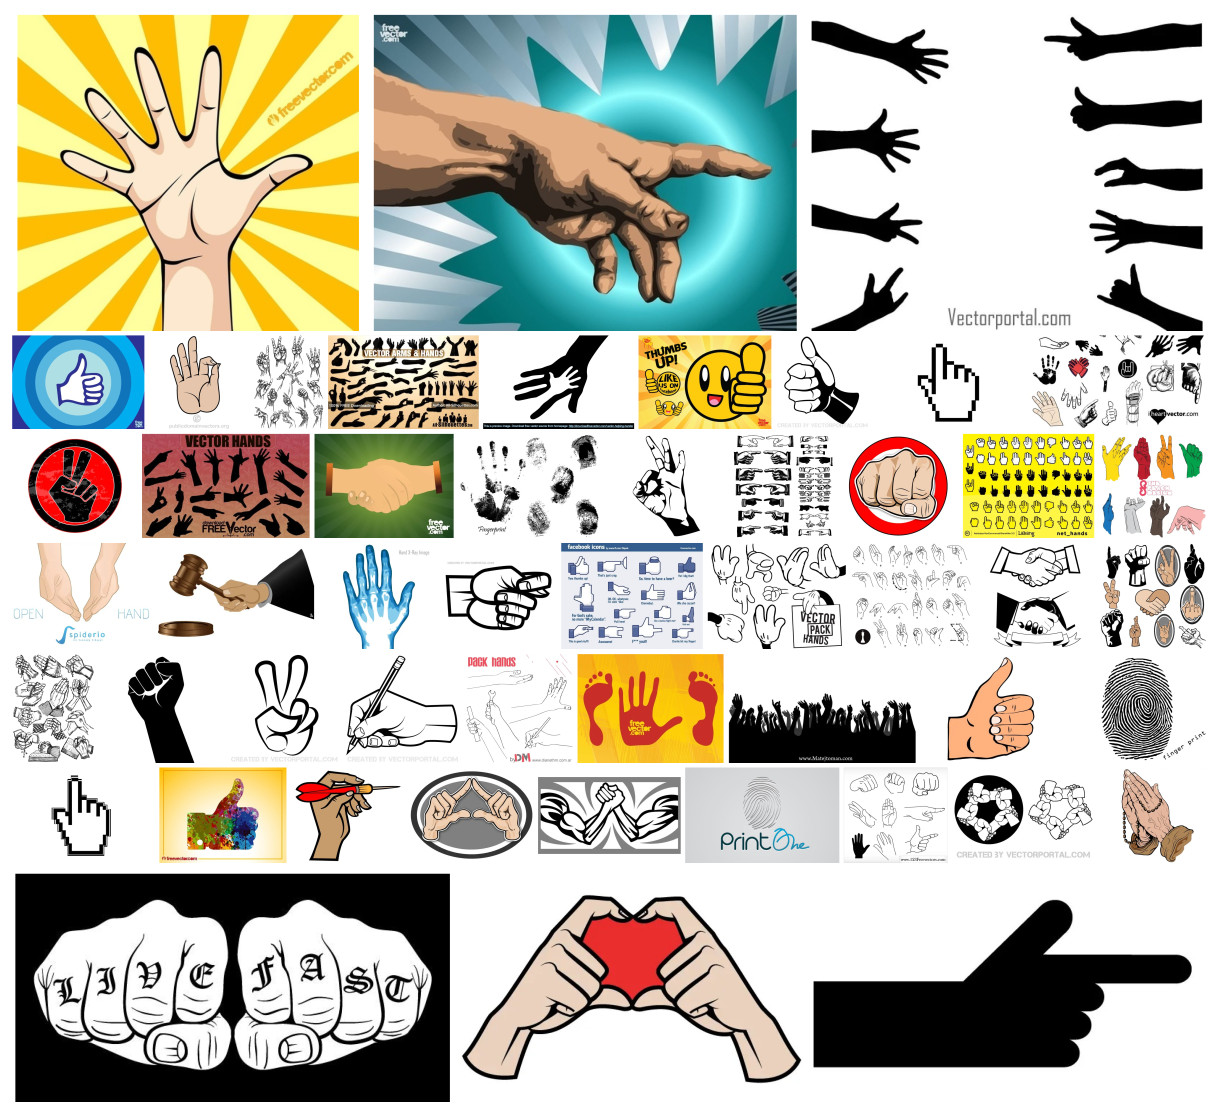 A Handy Collection: 51 Free Vector Hand Designs for Your Creative Projects